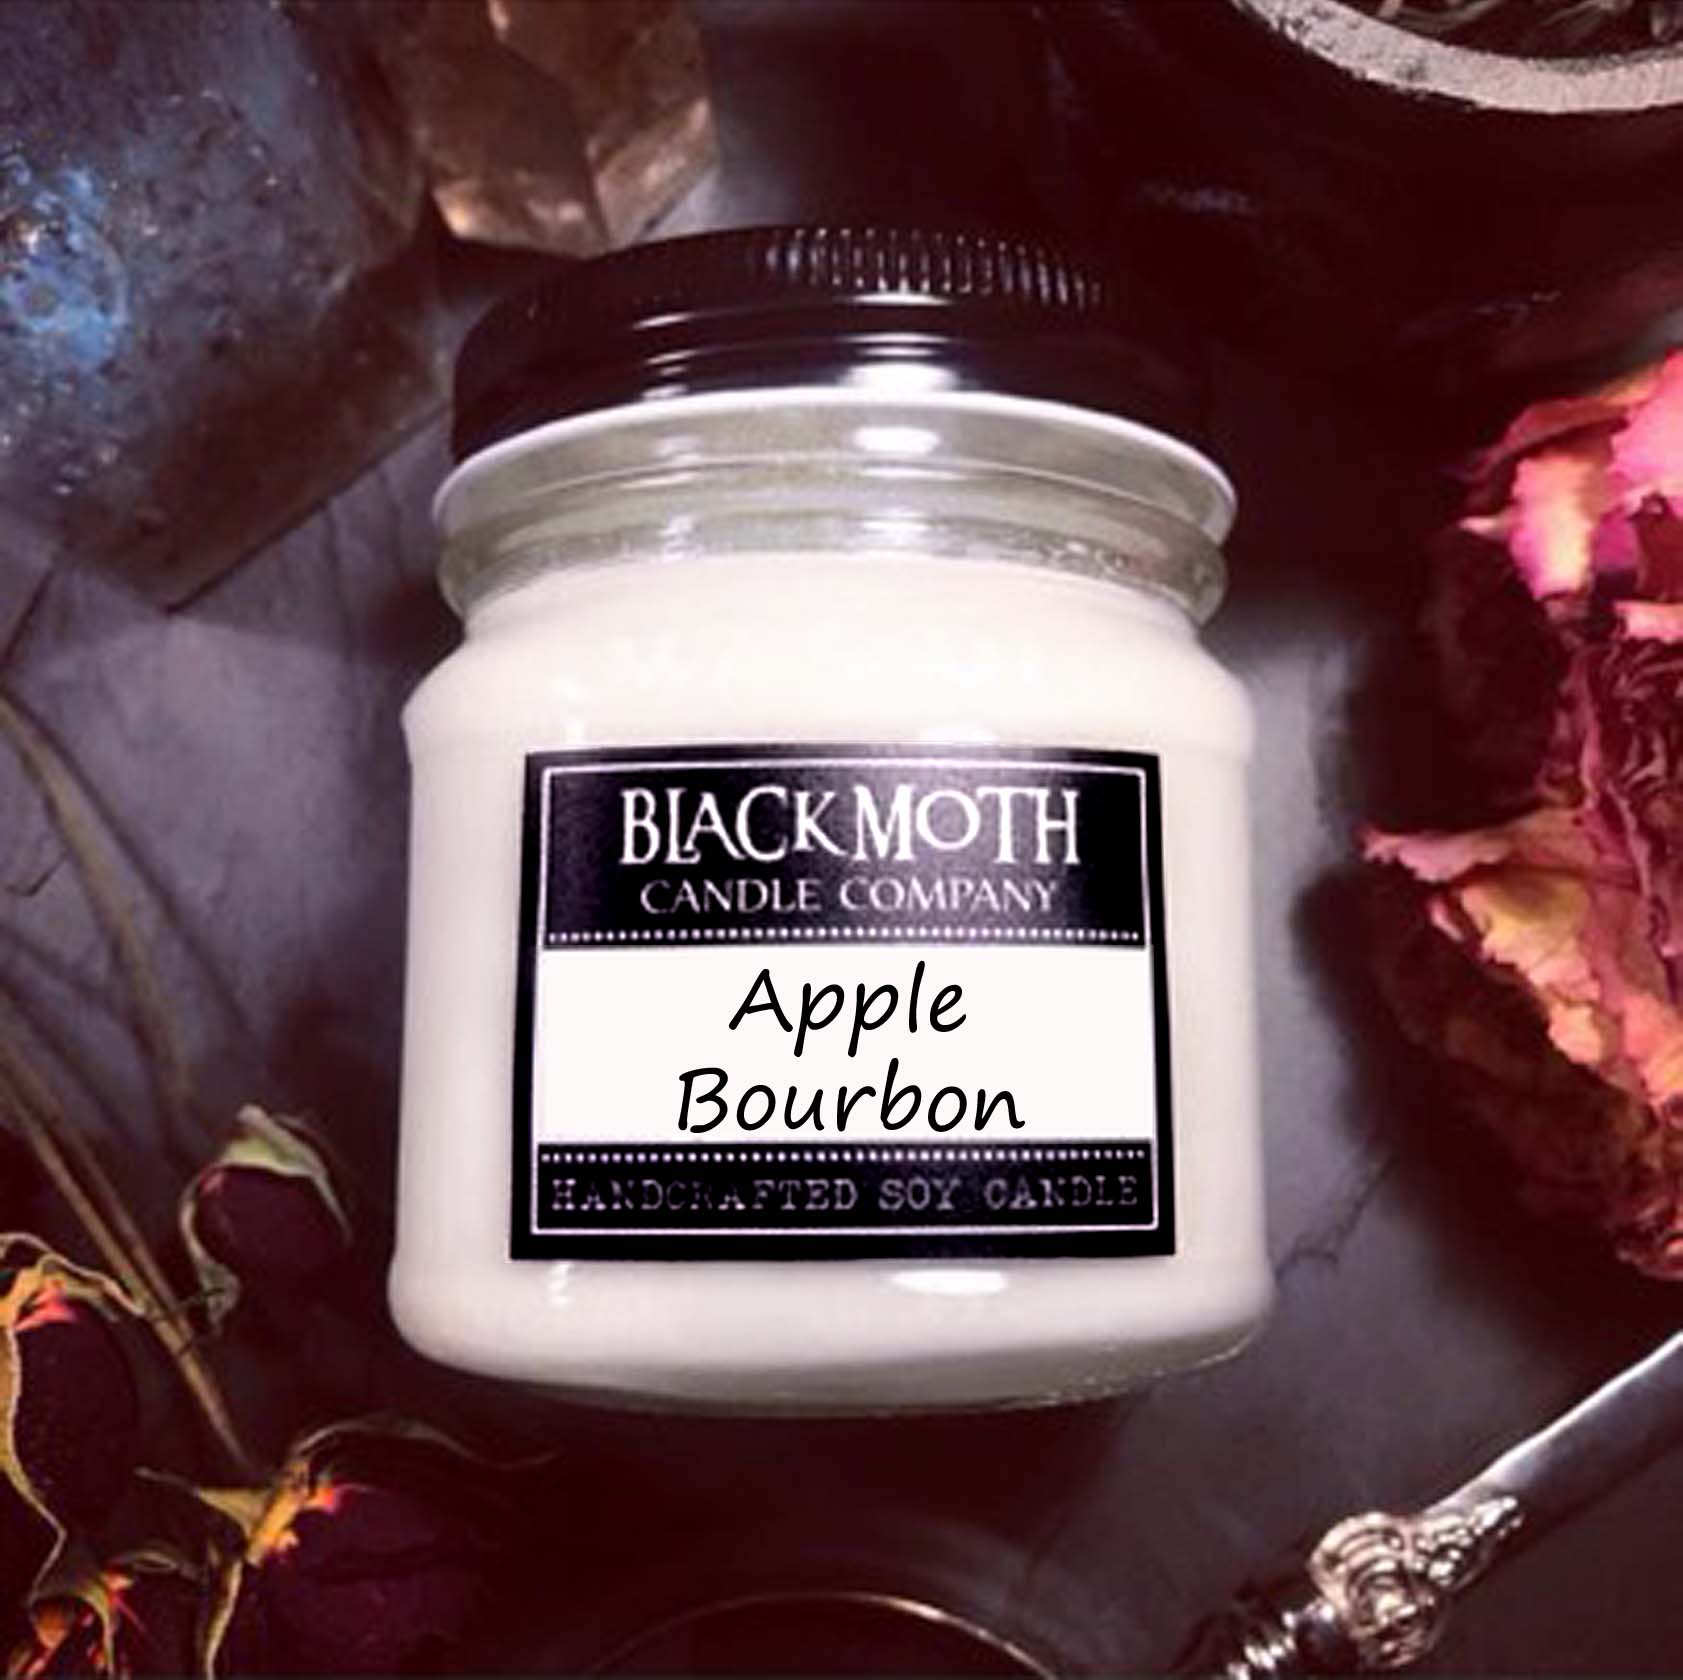 8 oz Apple Bourbon Scented Soy Candle in Mason Jar